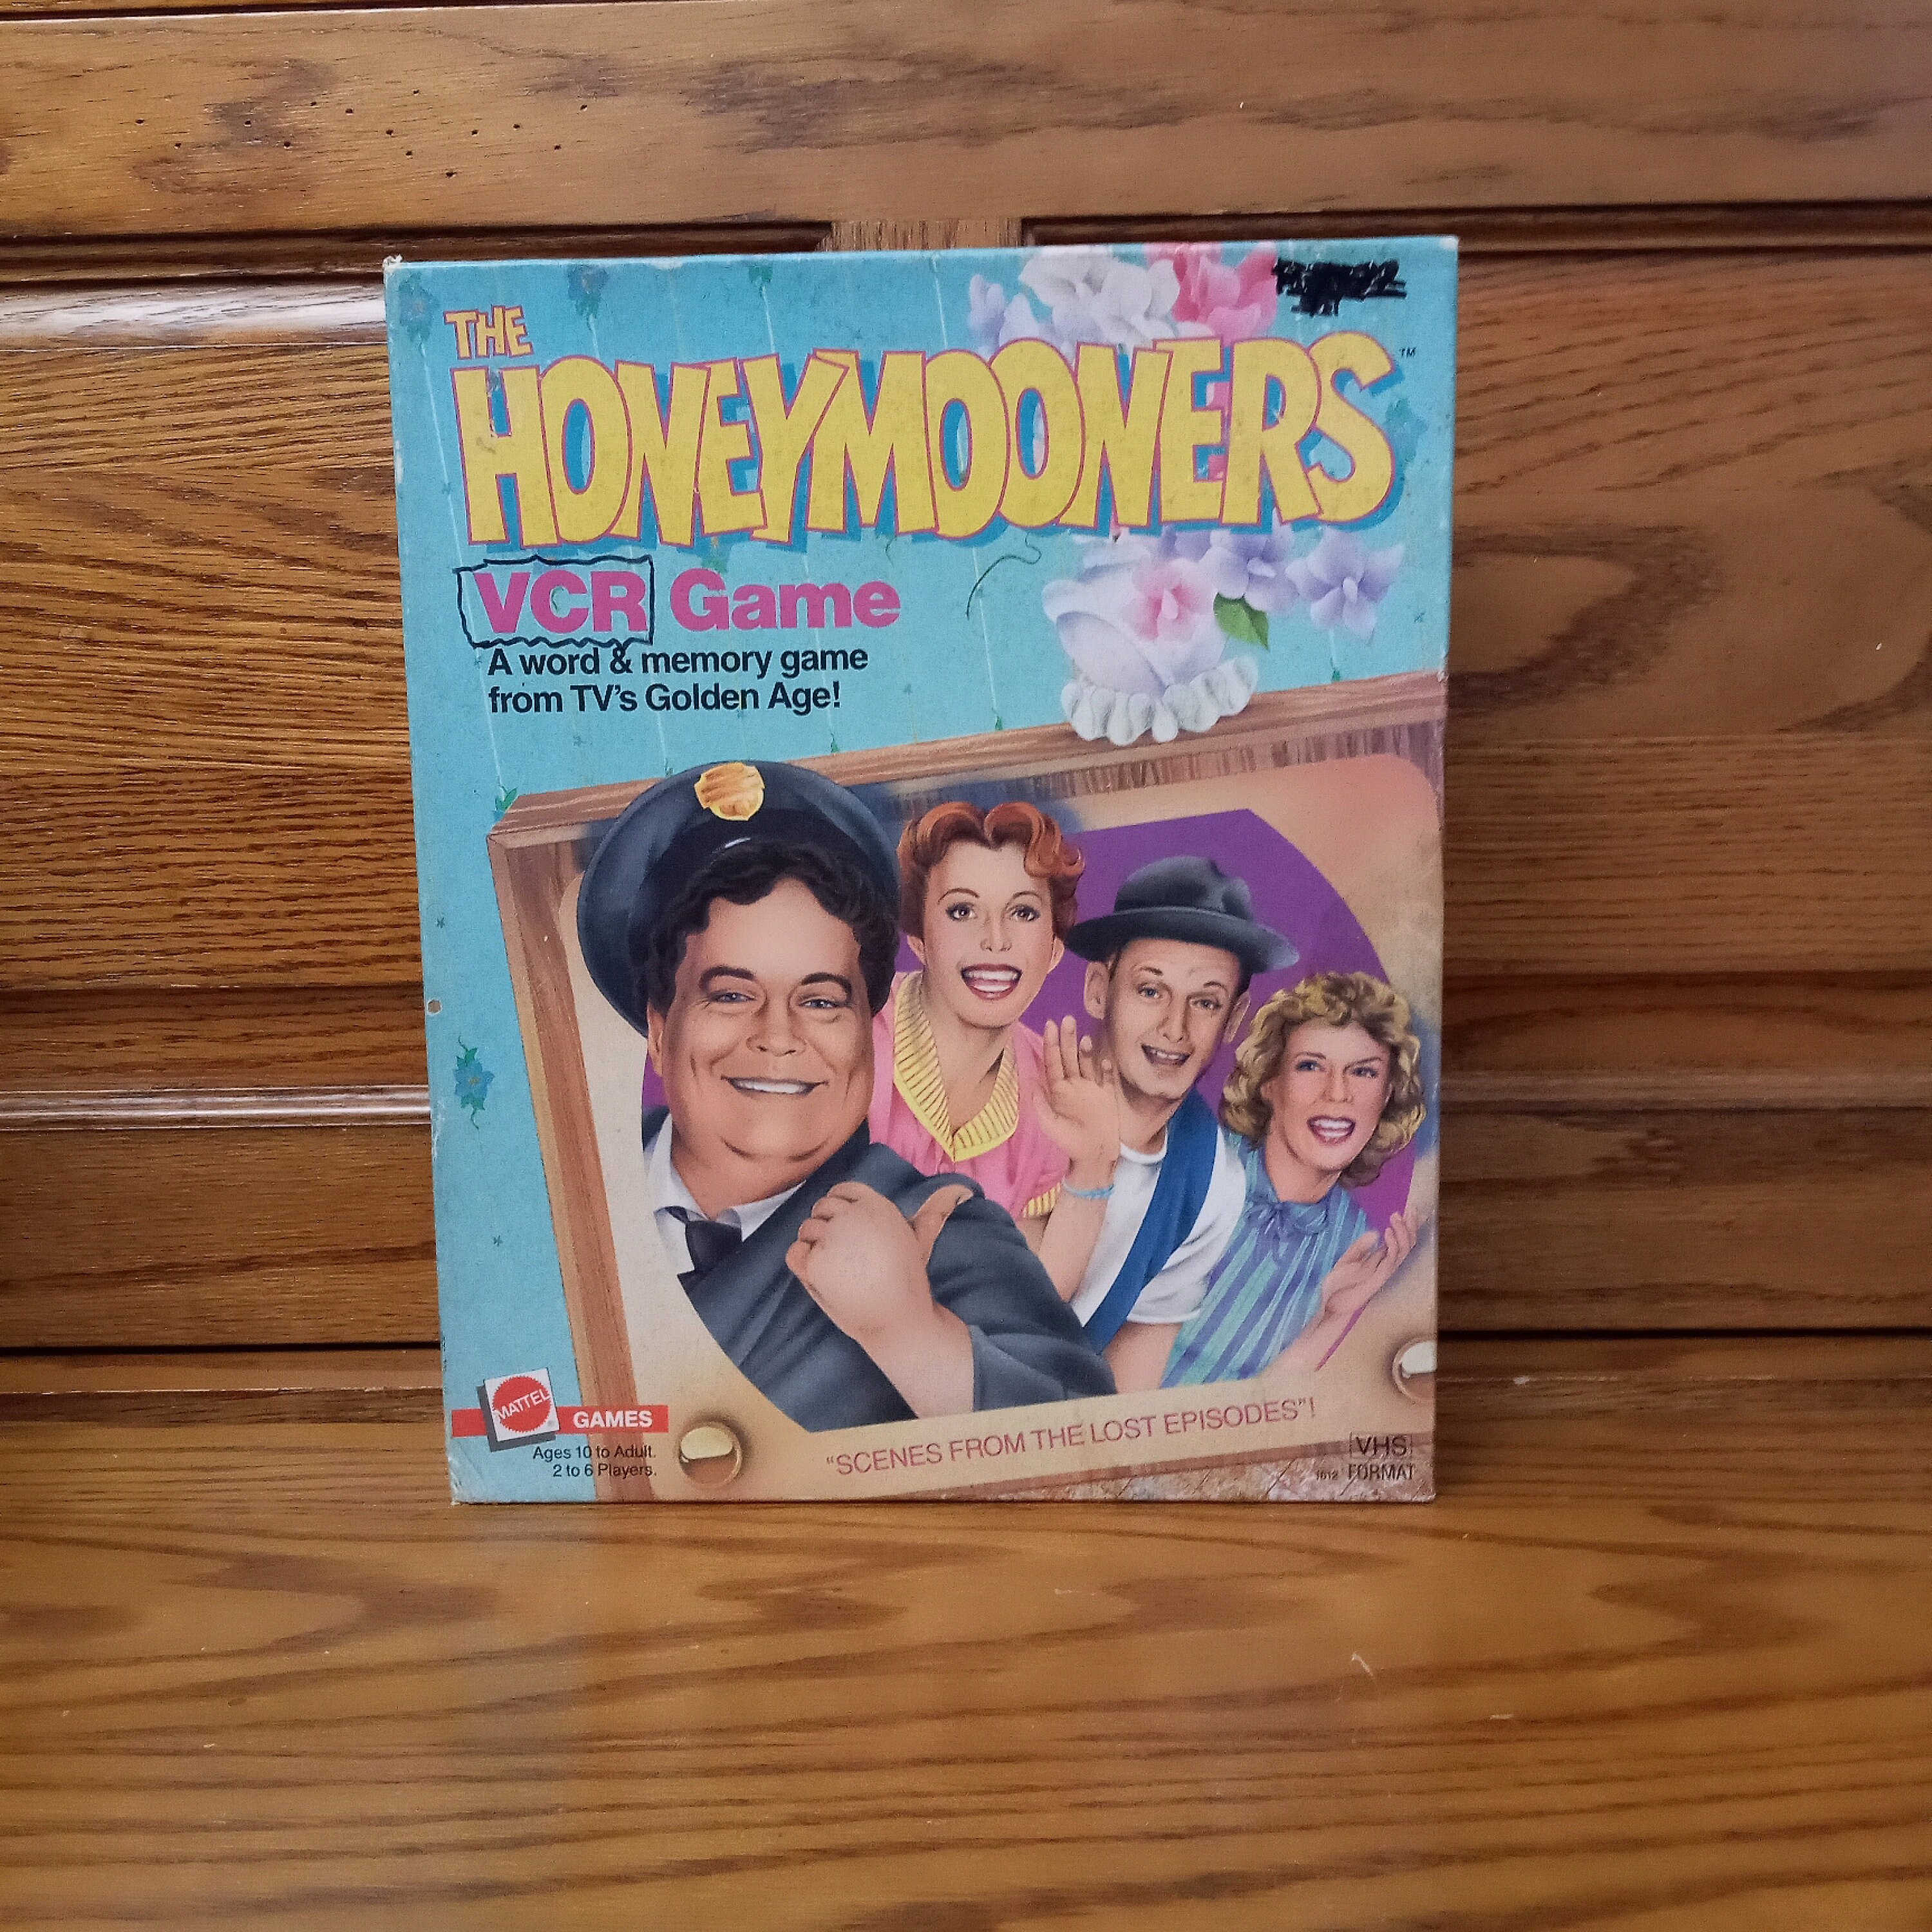 1986 Vintage Mattel 1612 The Honeymooners VCR Game in 3rd Party Wrap for sale online 